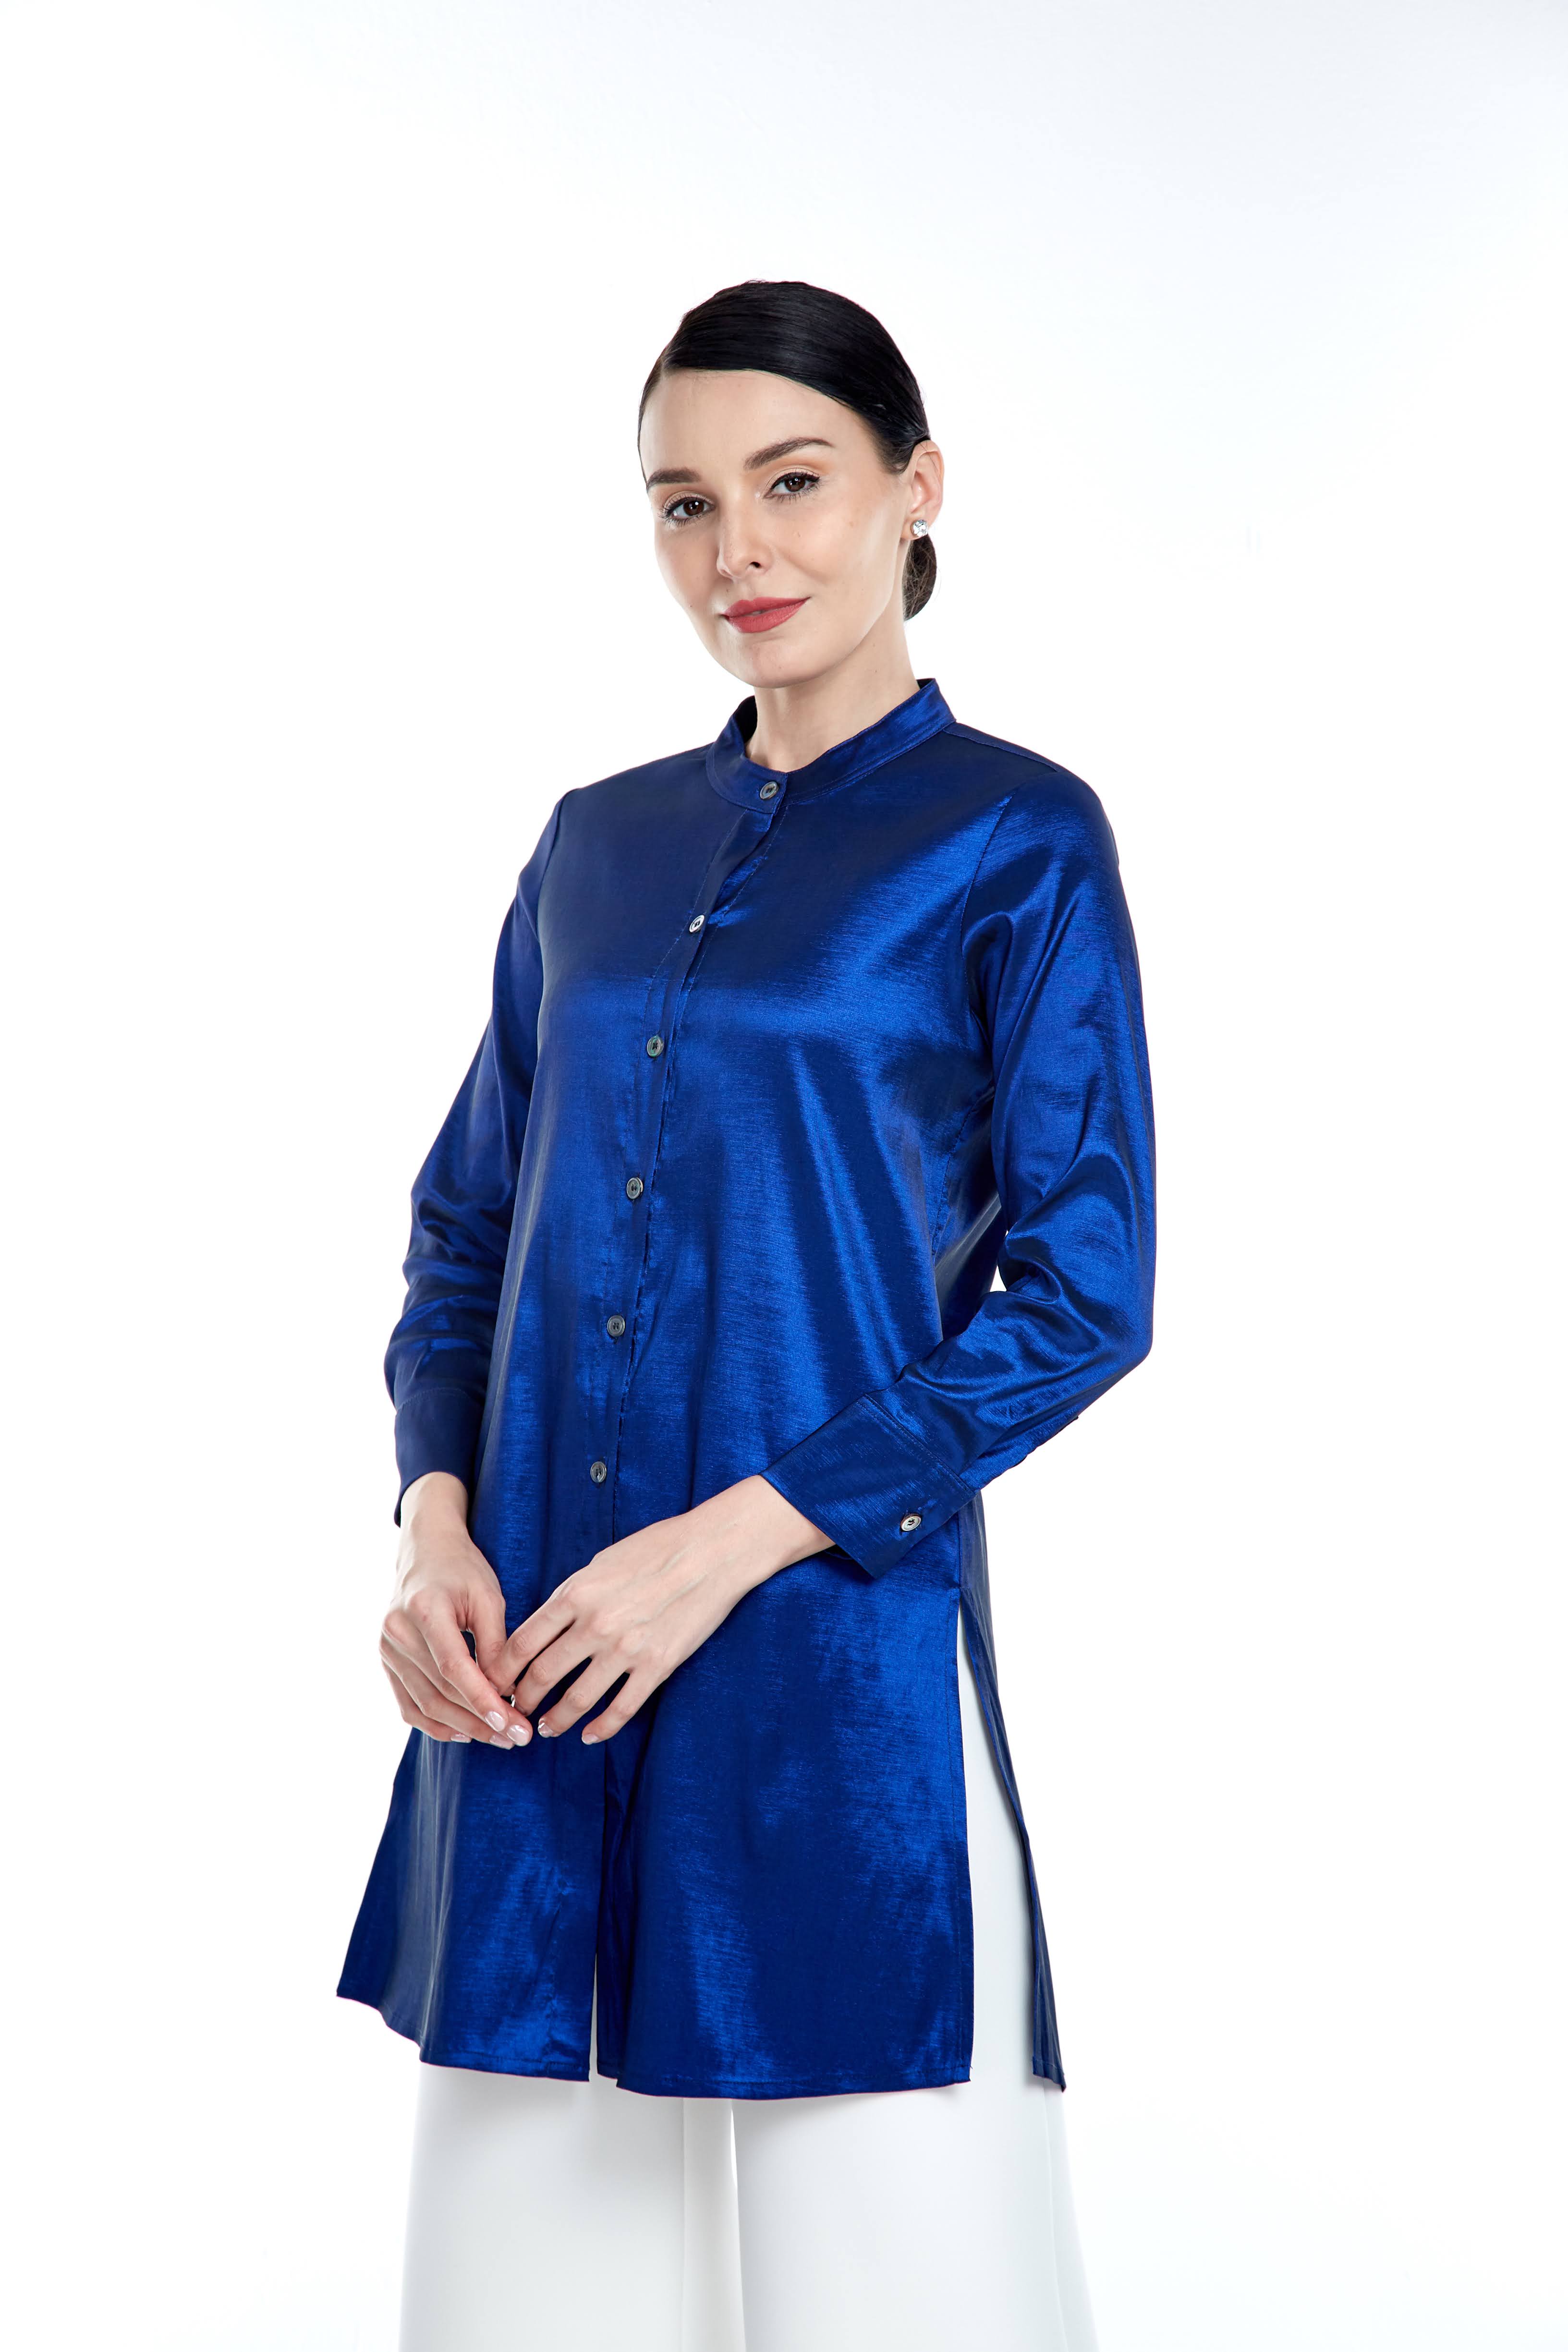 Royal Blue Stand Collar BlouseRoyal Blue Stand Collar Blouse